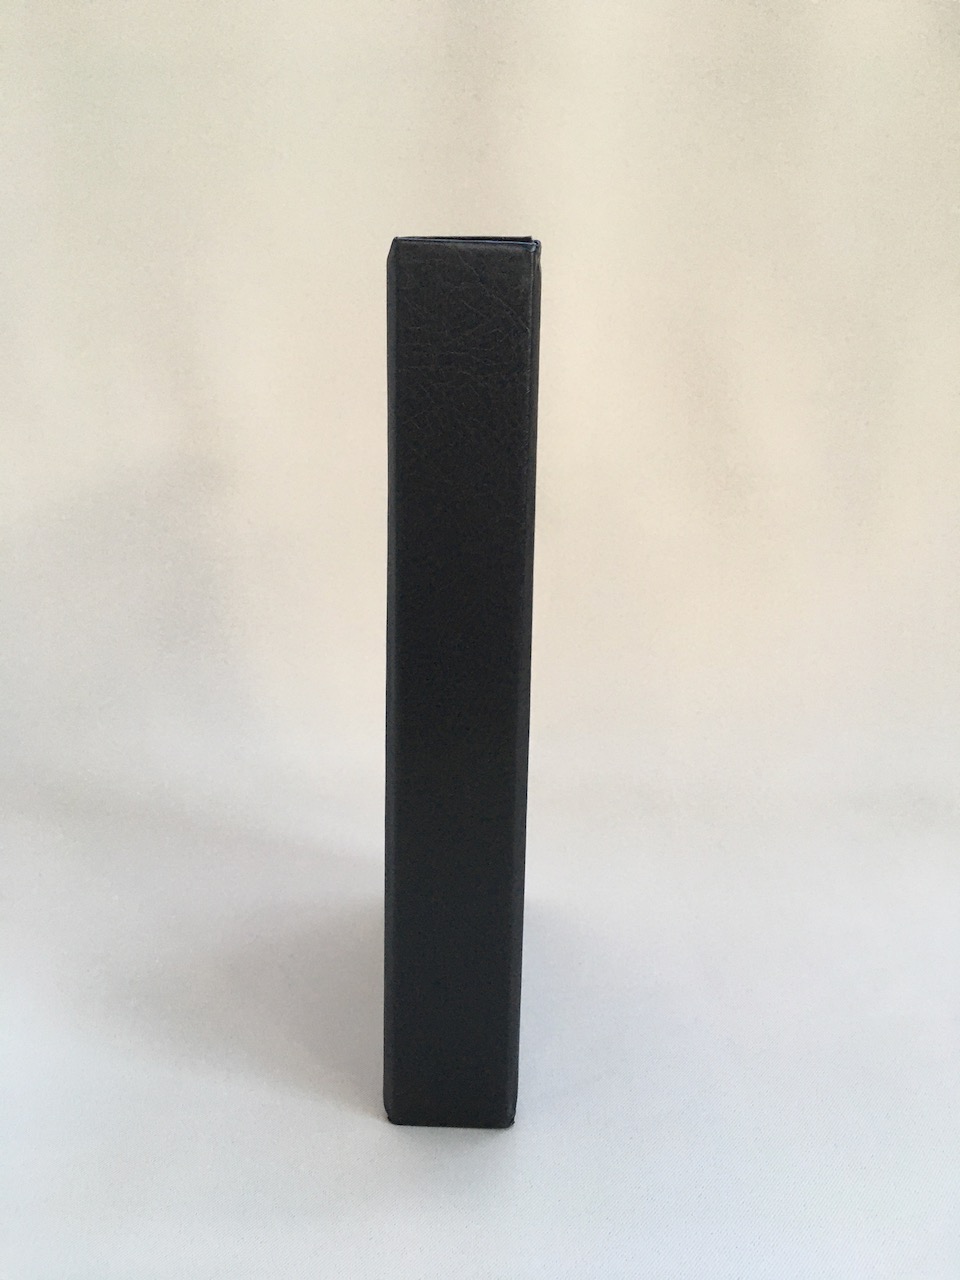 
Black Limited De Luxe edition of the Silmarillion 2002 5